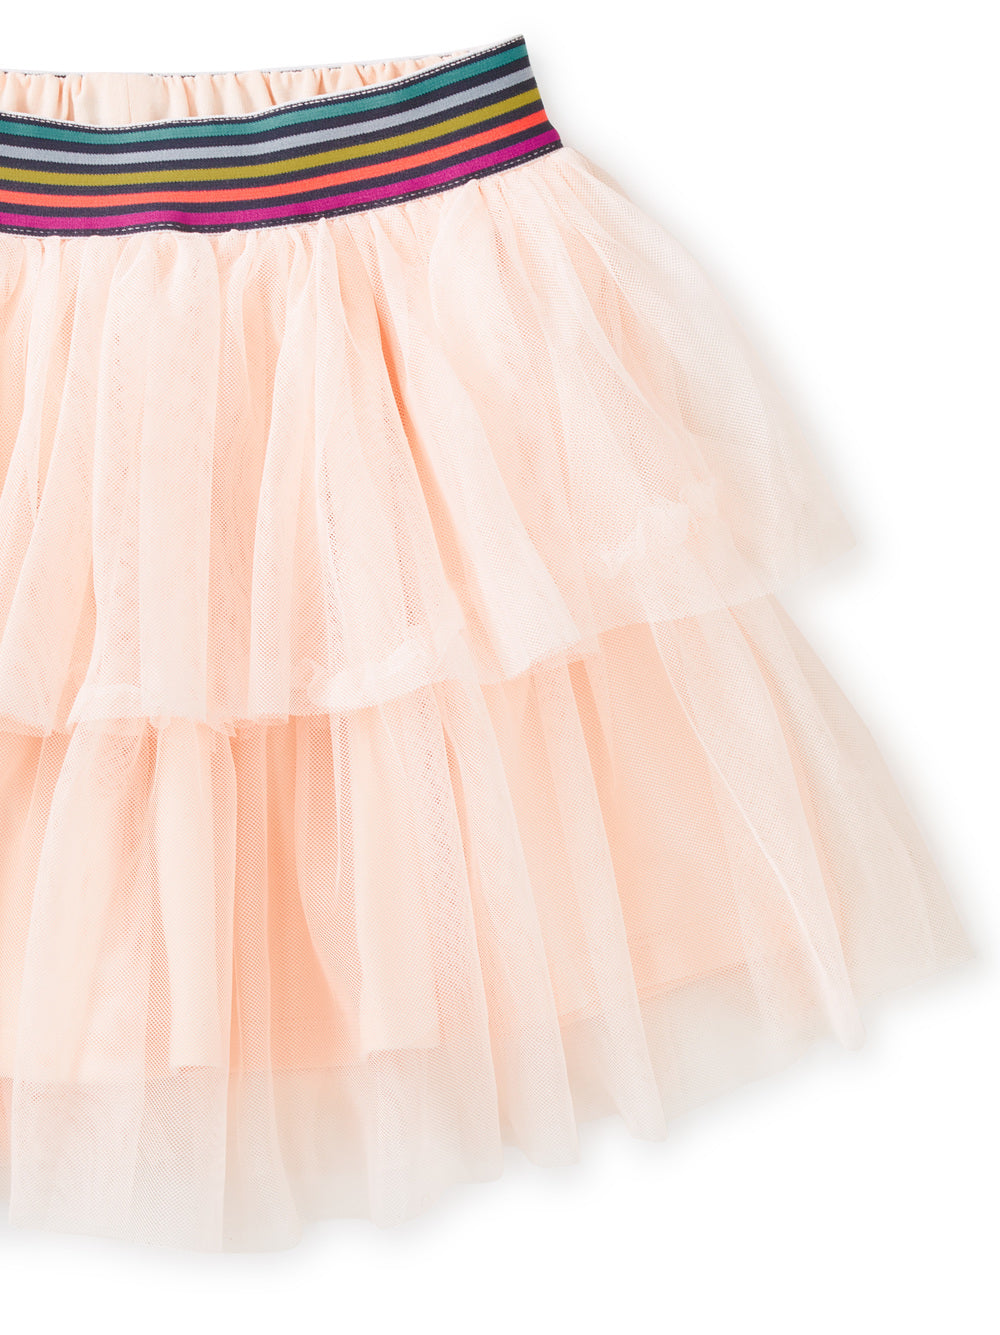 Tiered Tulle Skirt- Creole Pink